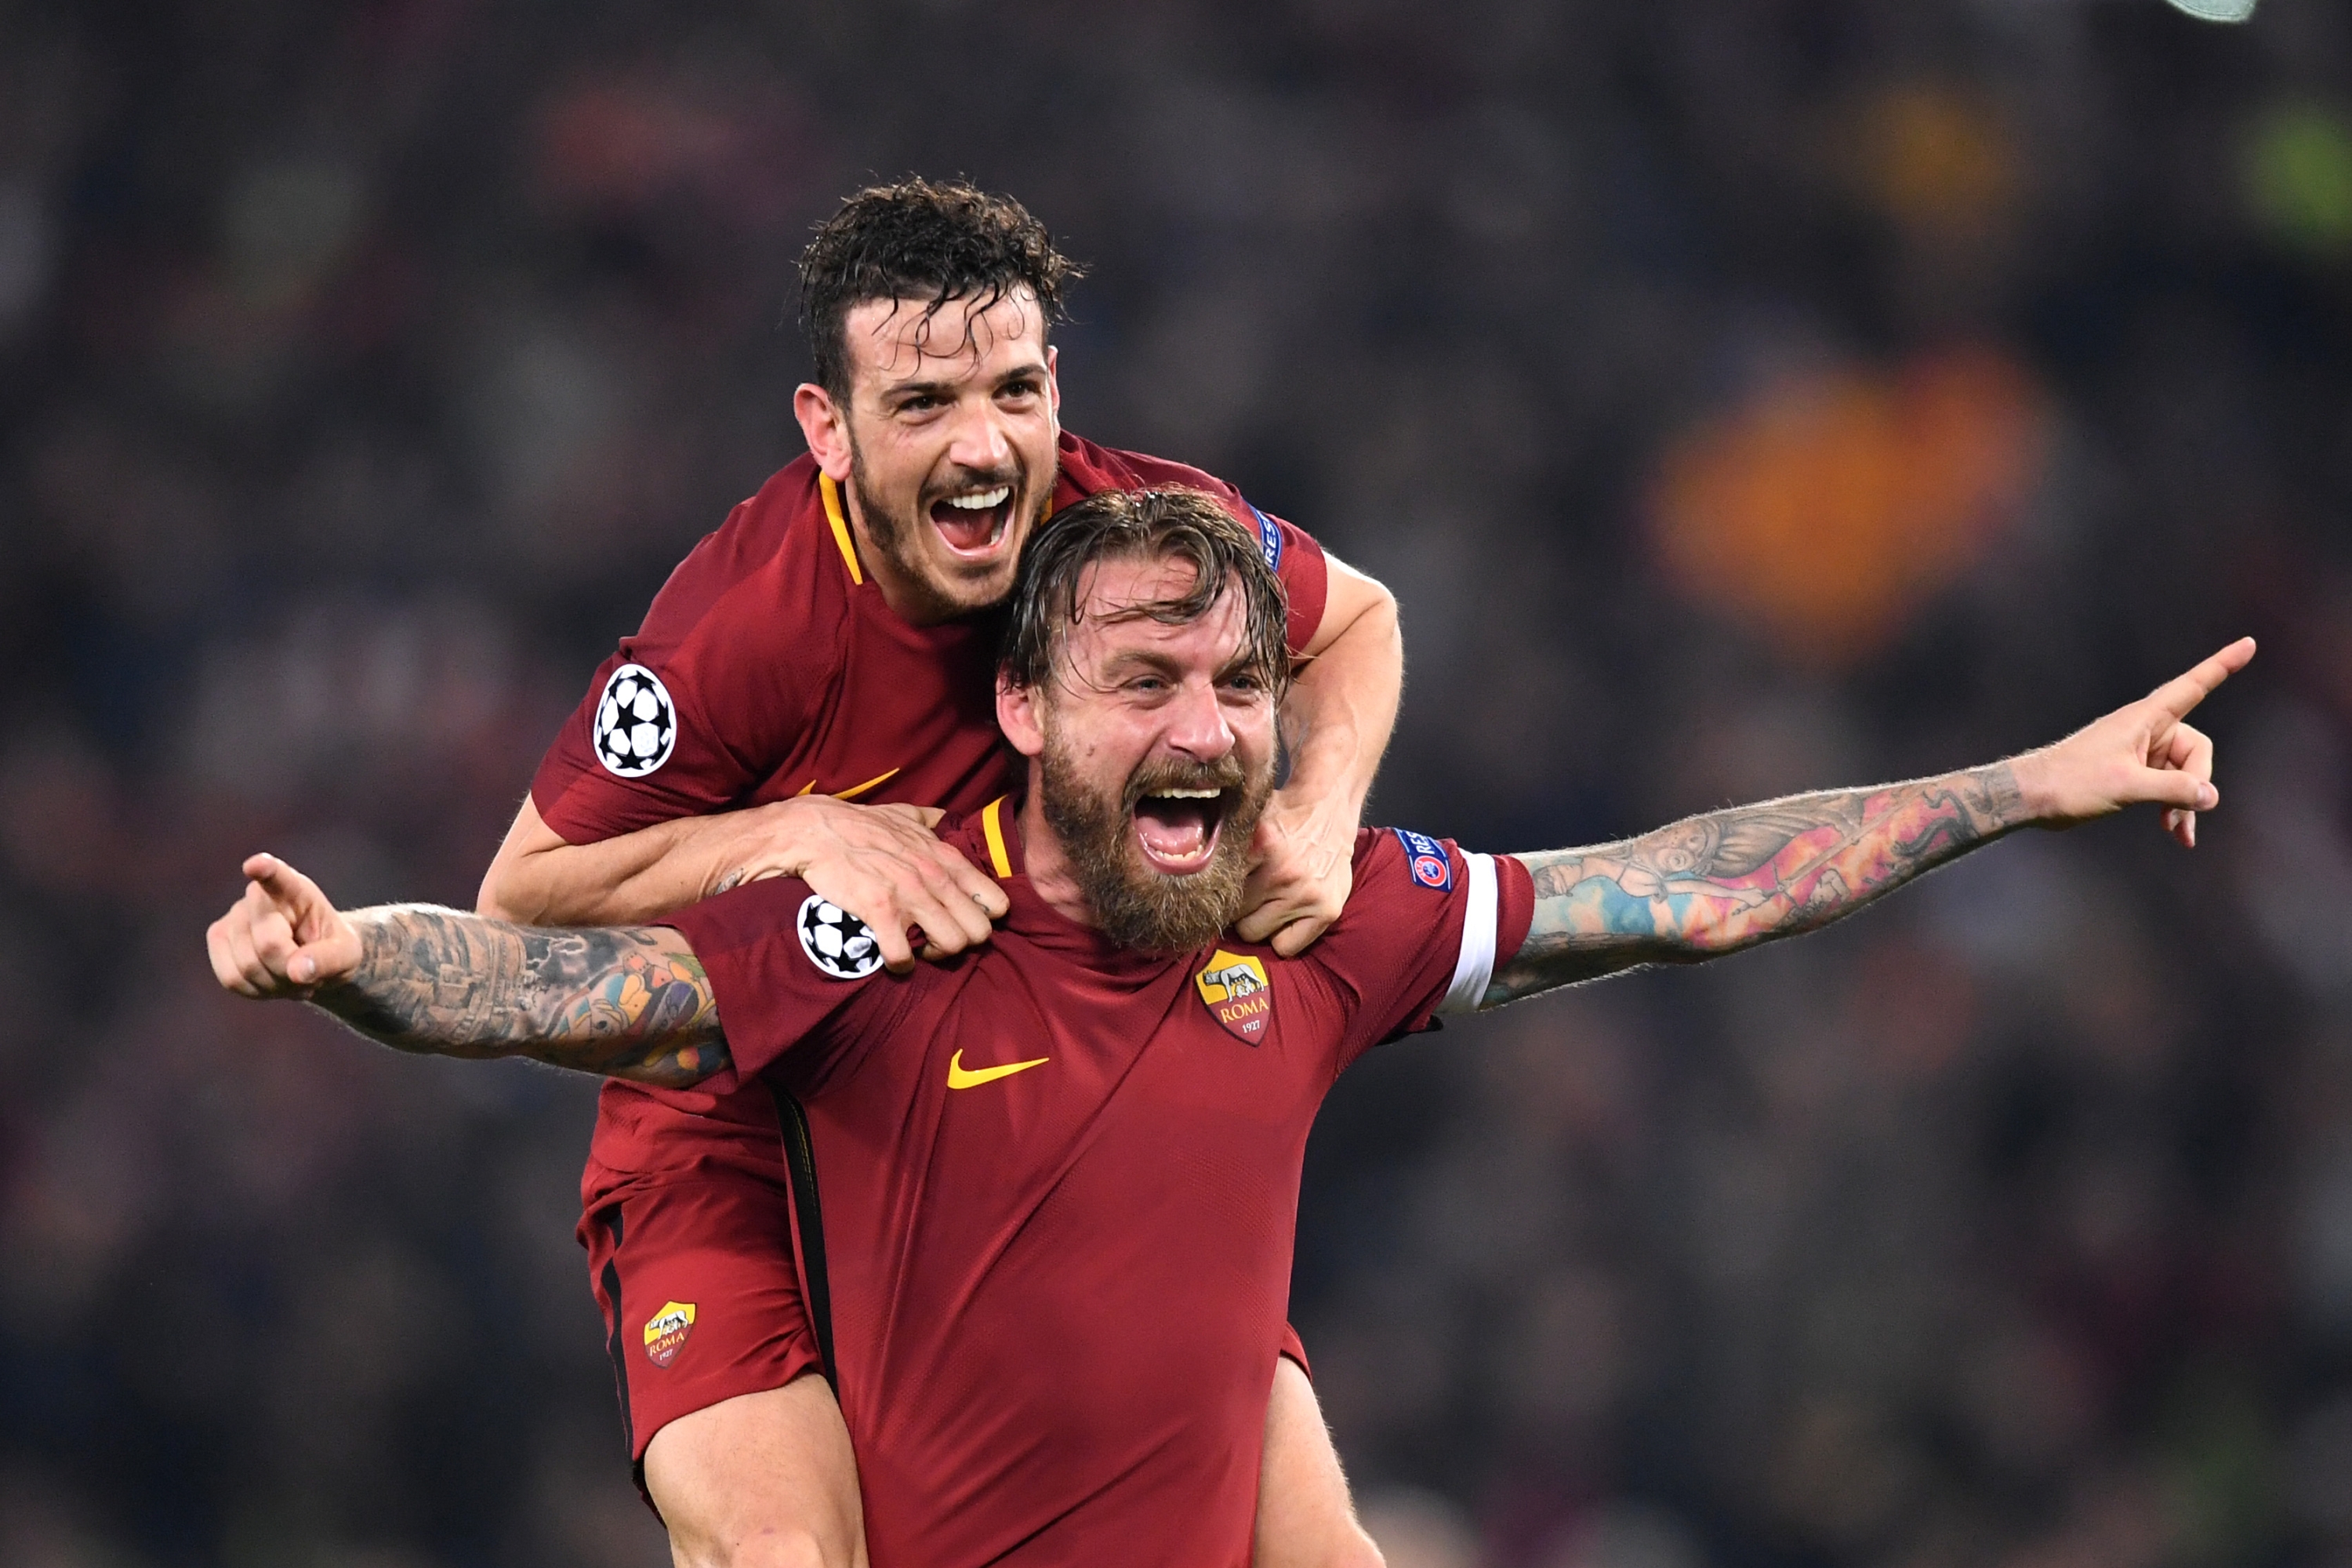 <enter caption here> UEFA Champions League Quarter Final Second Leg match between AS Roma and FC Barcelona at Stadio Olimpico on April 10, 2018 in Rome, Italy.